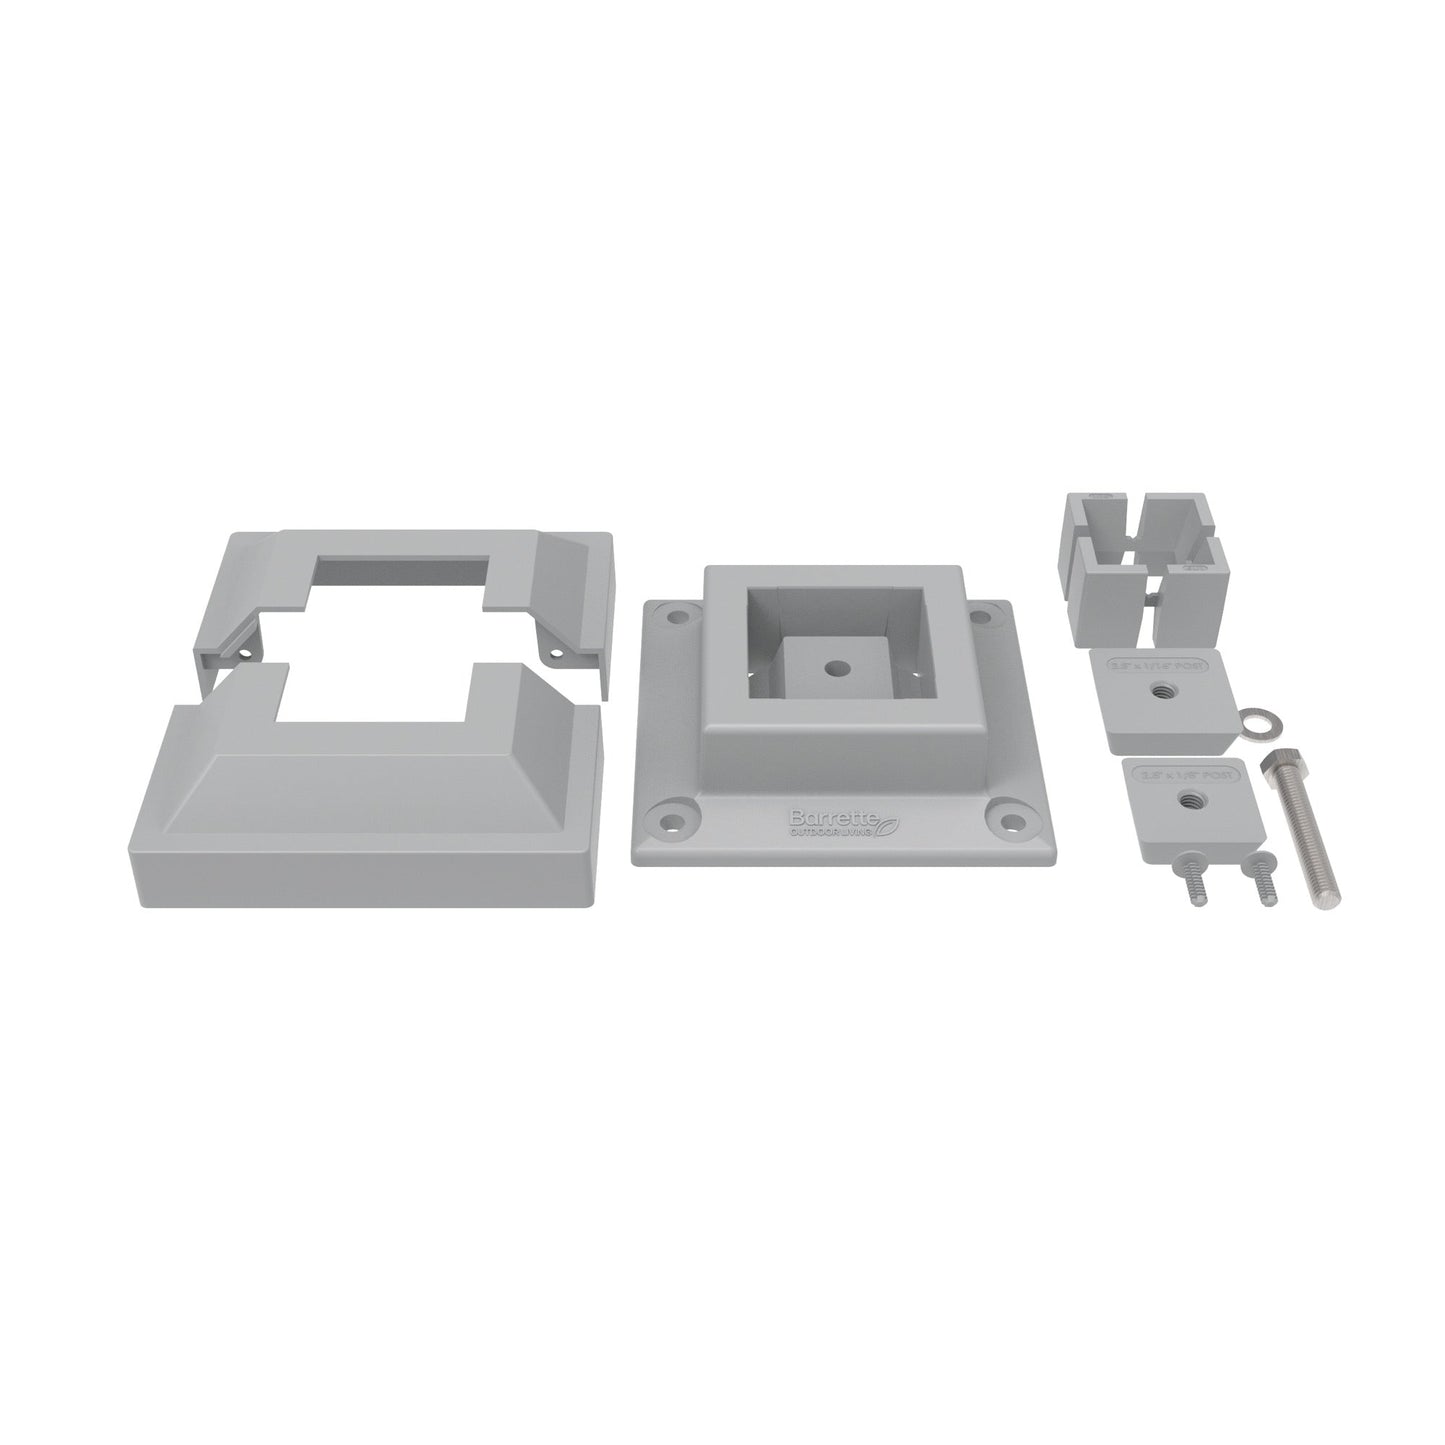 Surface Mount & Cover G2 - 2.5"